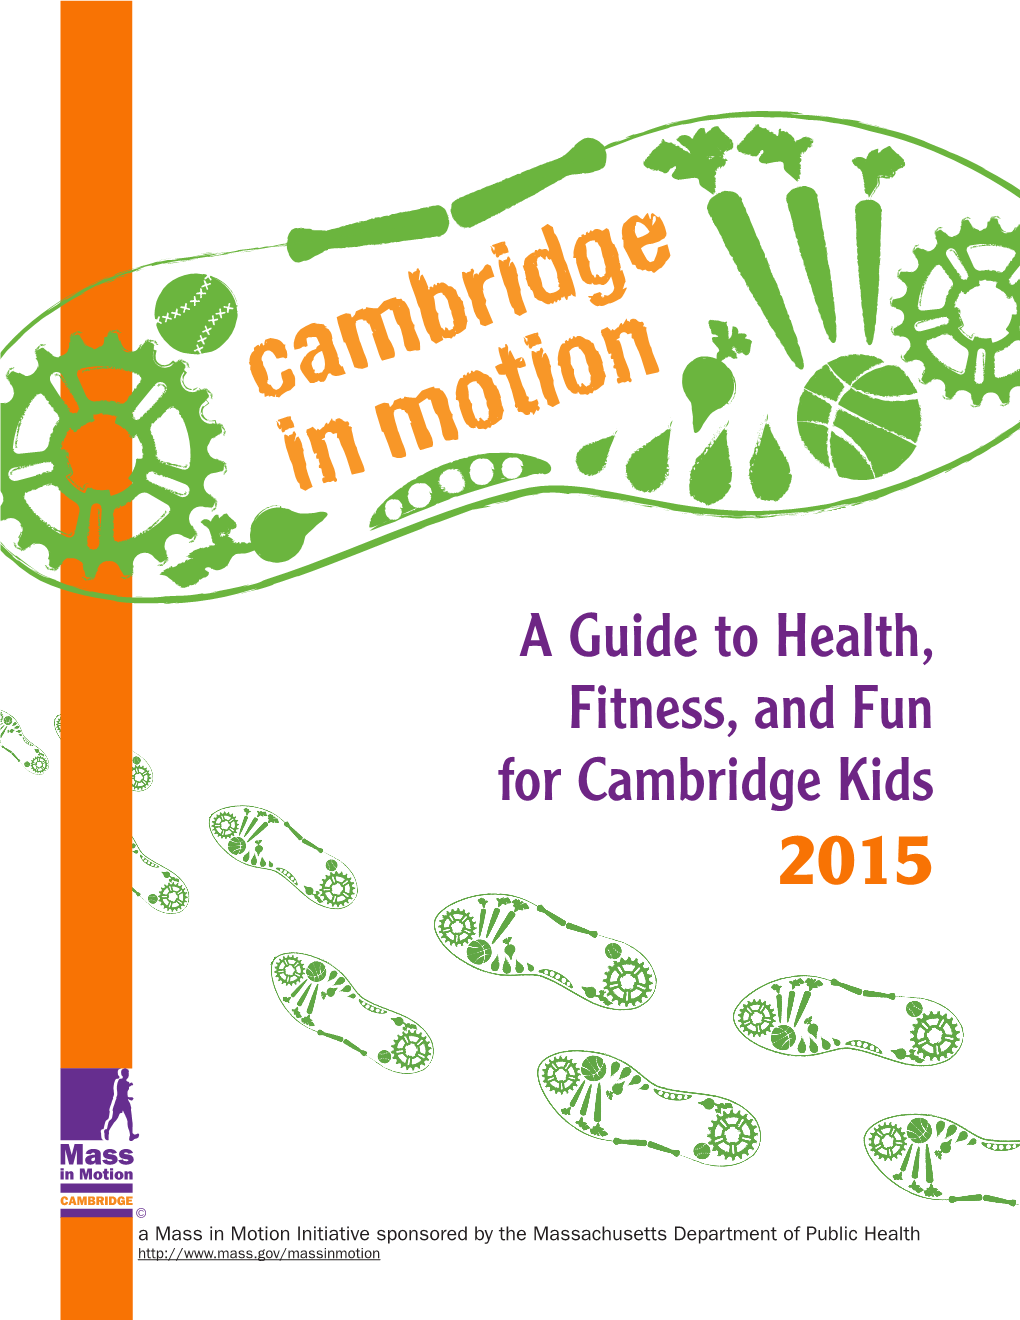 A Guide to Health, Fitness, and Fun for Cambridge Kids 2015